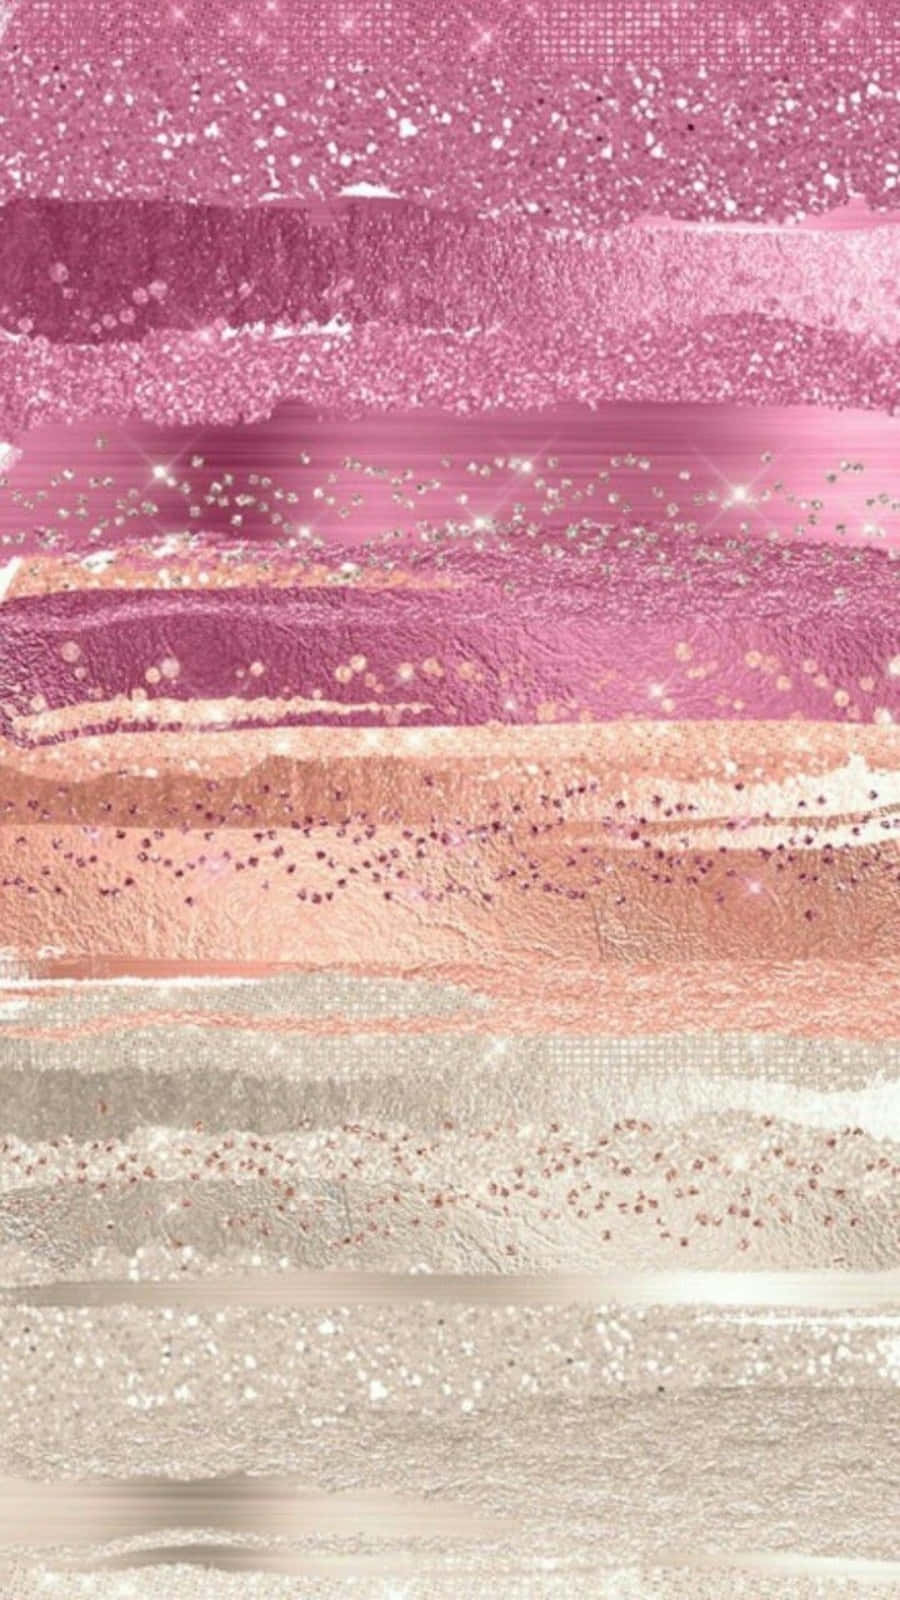 A Pink And White Striped Background With Glitter Wallpaper